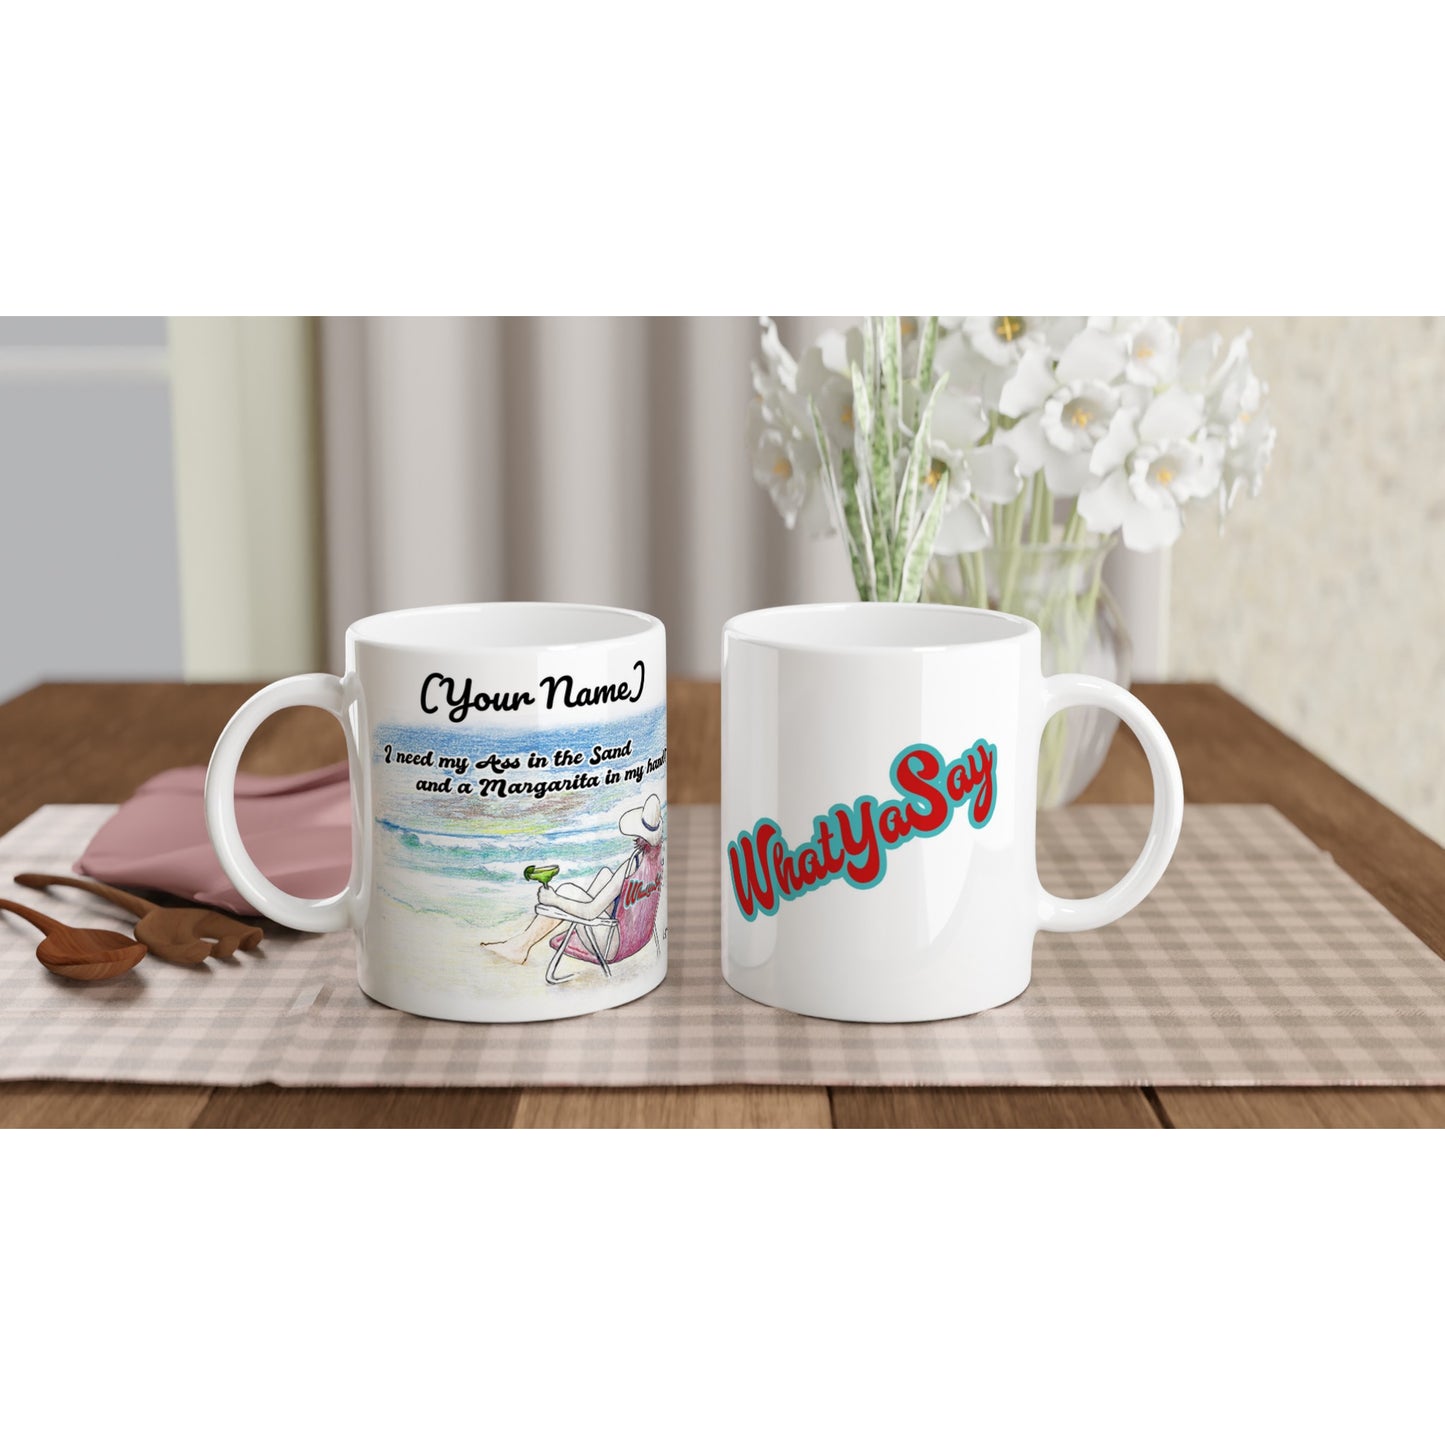 Two Personalized white ceramic 11oz mugs with original personalized motto [Your Name] I need my Ass in the Sand and a Margarita in my hand on the front and WhatYa Say logo on the back coffee mugs are dishwasher and microwave safe from WhatYa Say Apparel sitting on coffee table with green and white placemat.